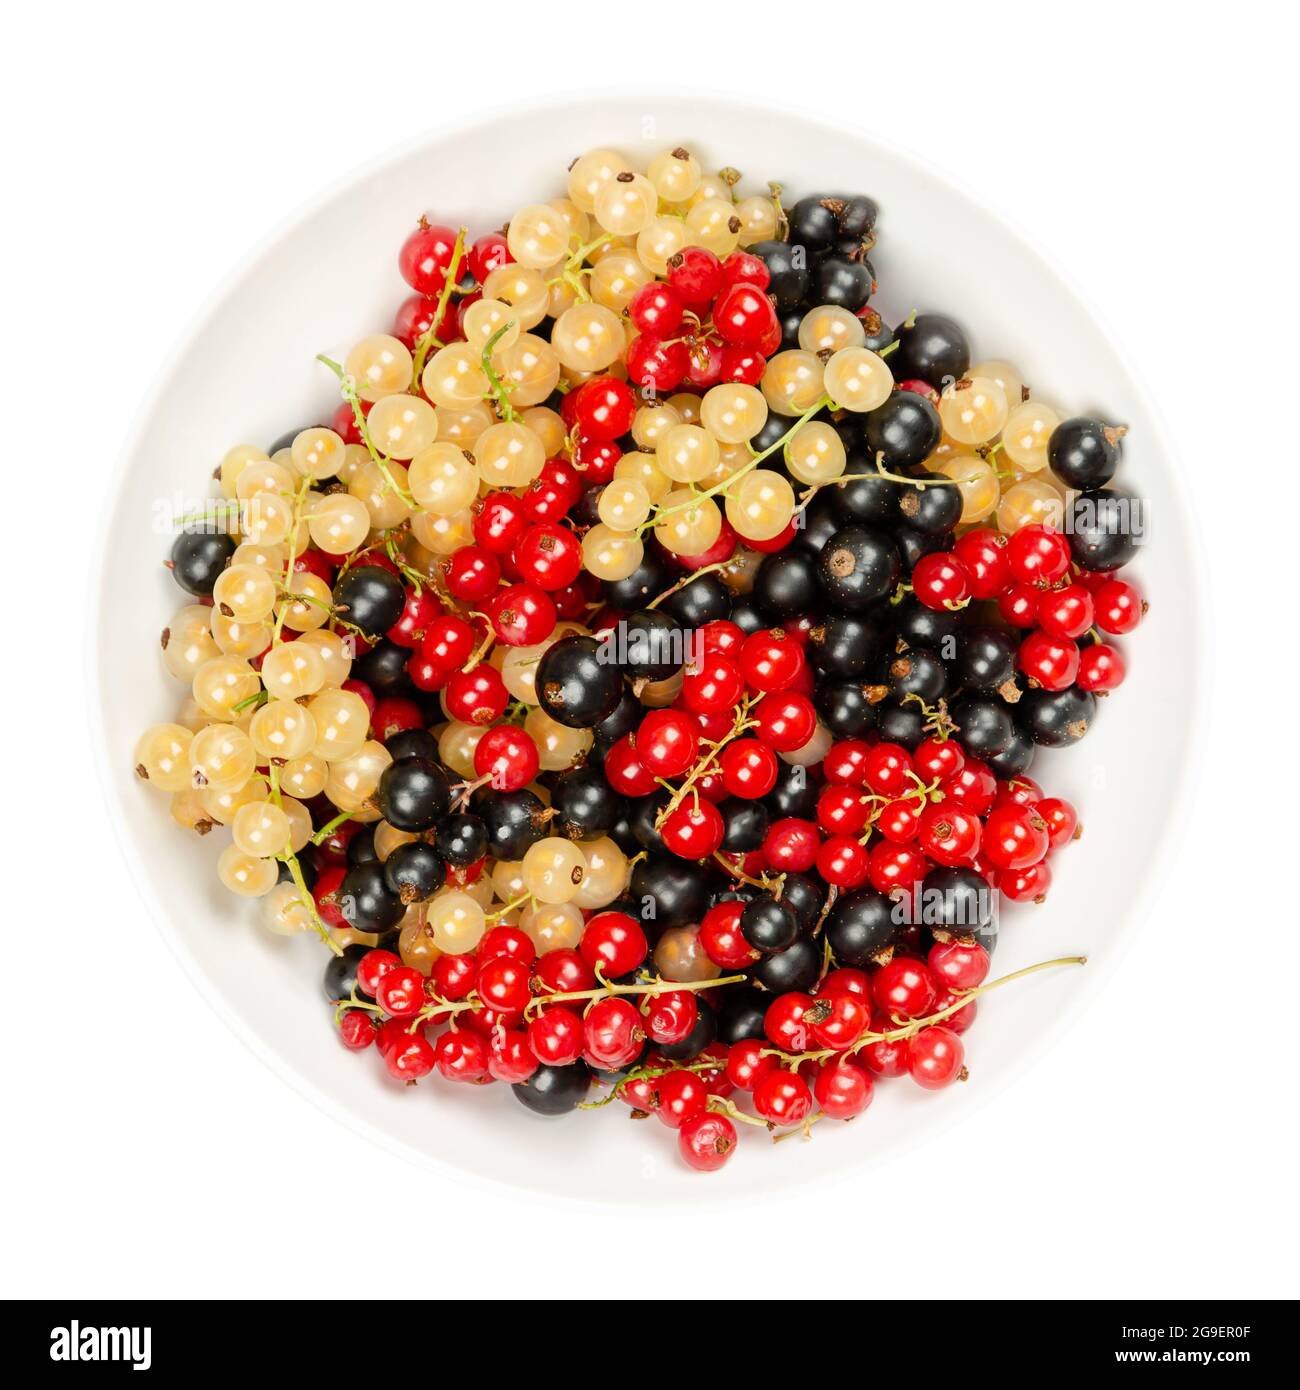 Currant berries, in a white bowl. Fresh and ripe white currant, redcurrant and blackcurrant berries, spherical fruits of Ribes cultivars. Sweet fruits. Stock Photo